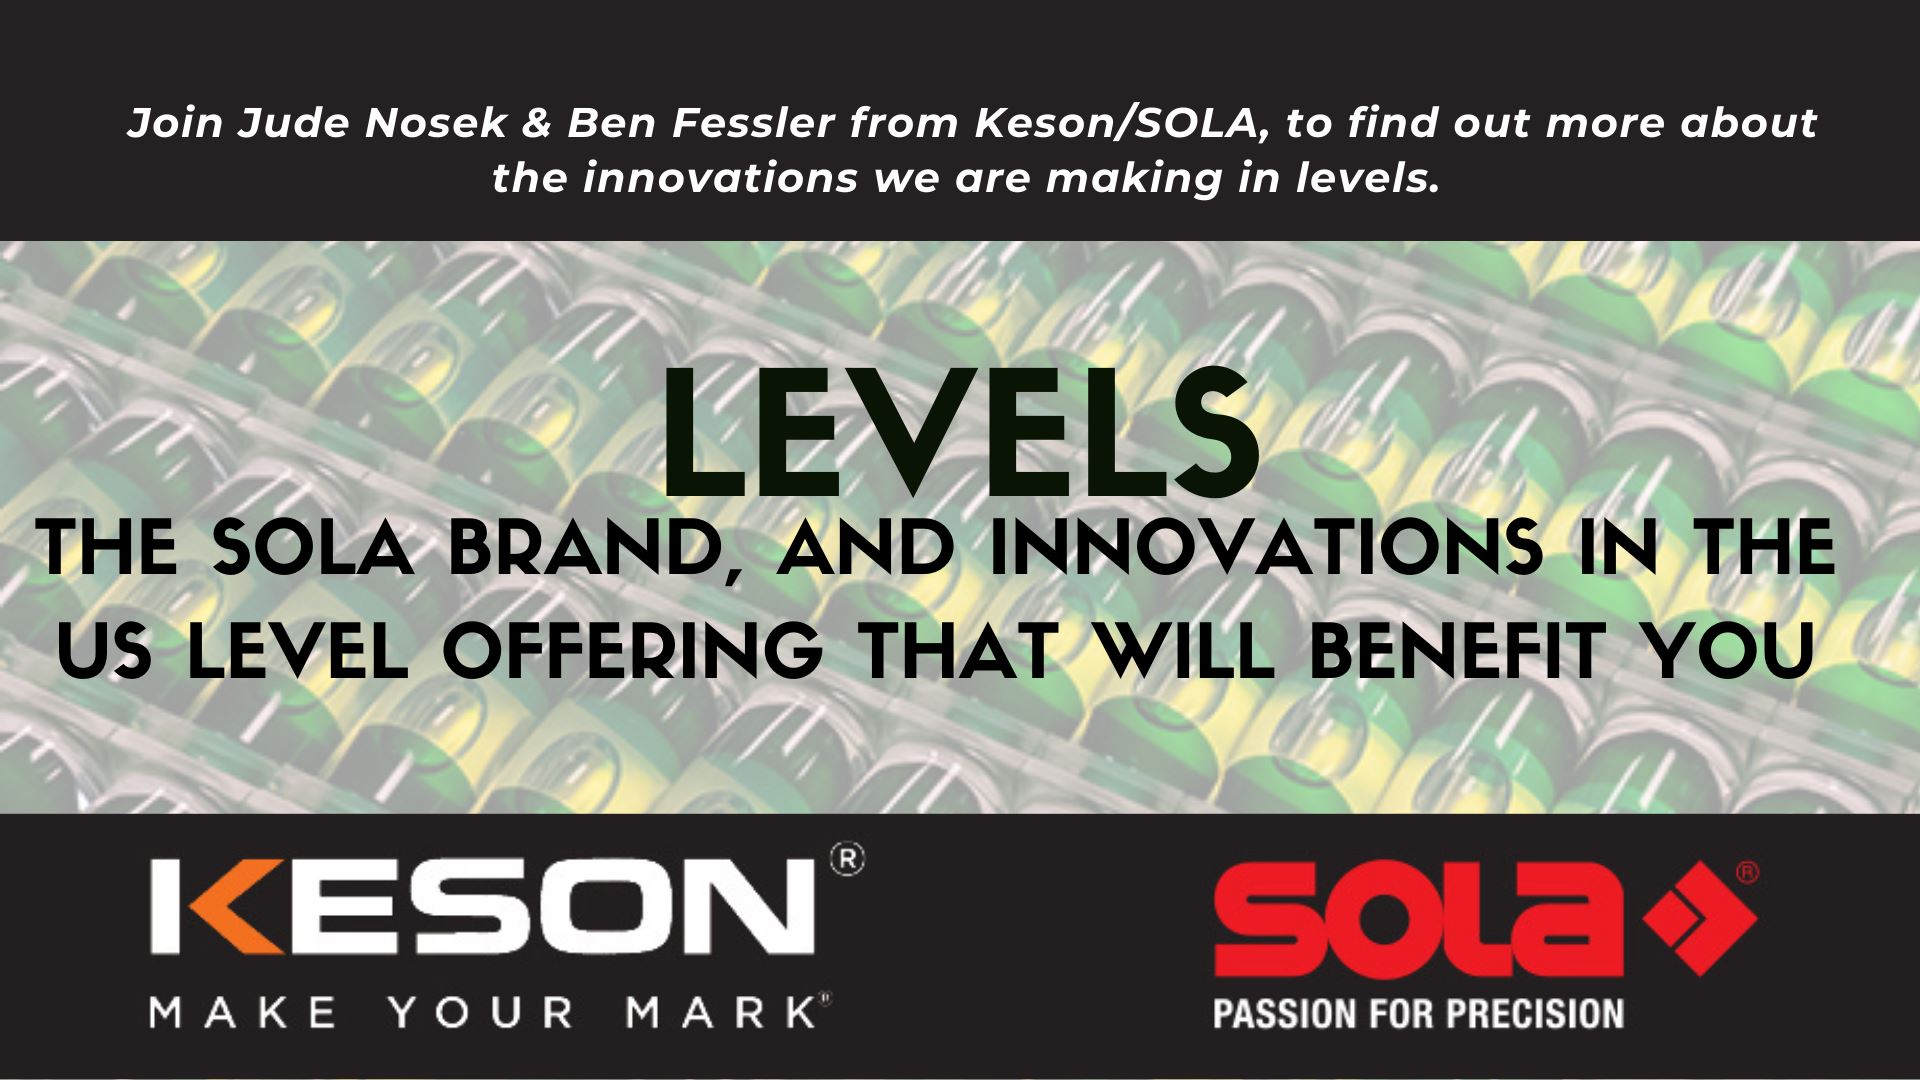  Levels, the SOLA brand, and Innovations In The US Level Offering That Will Benefit You